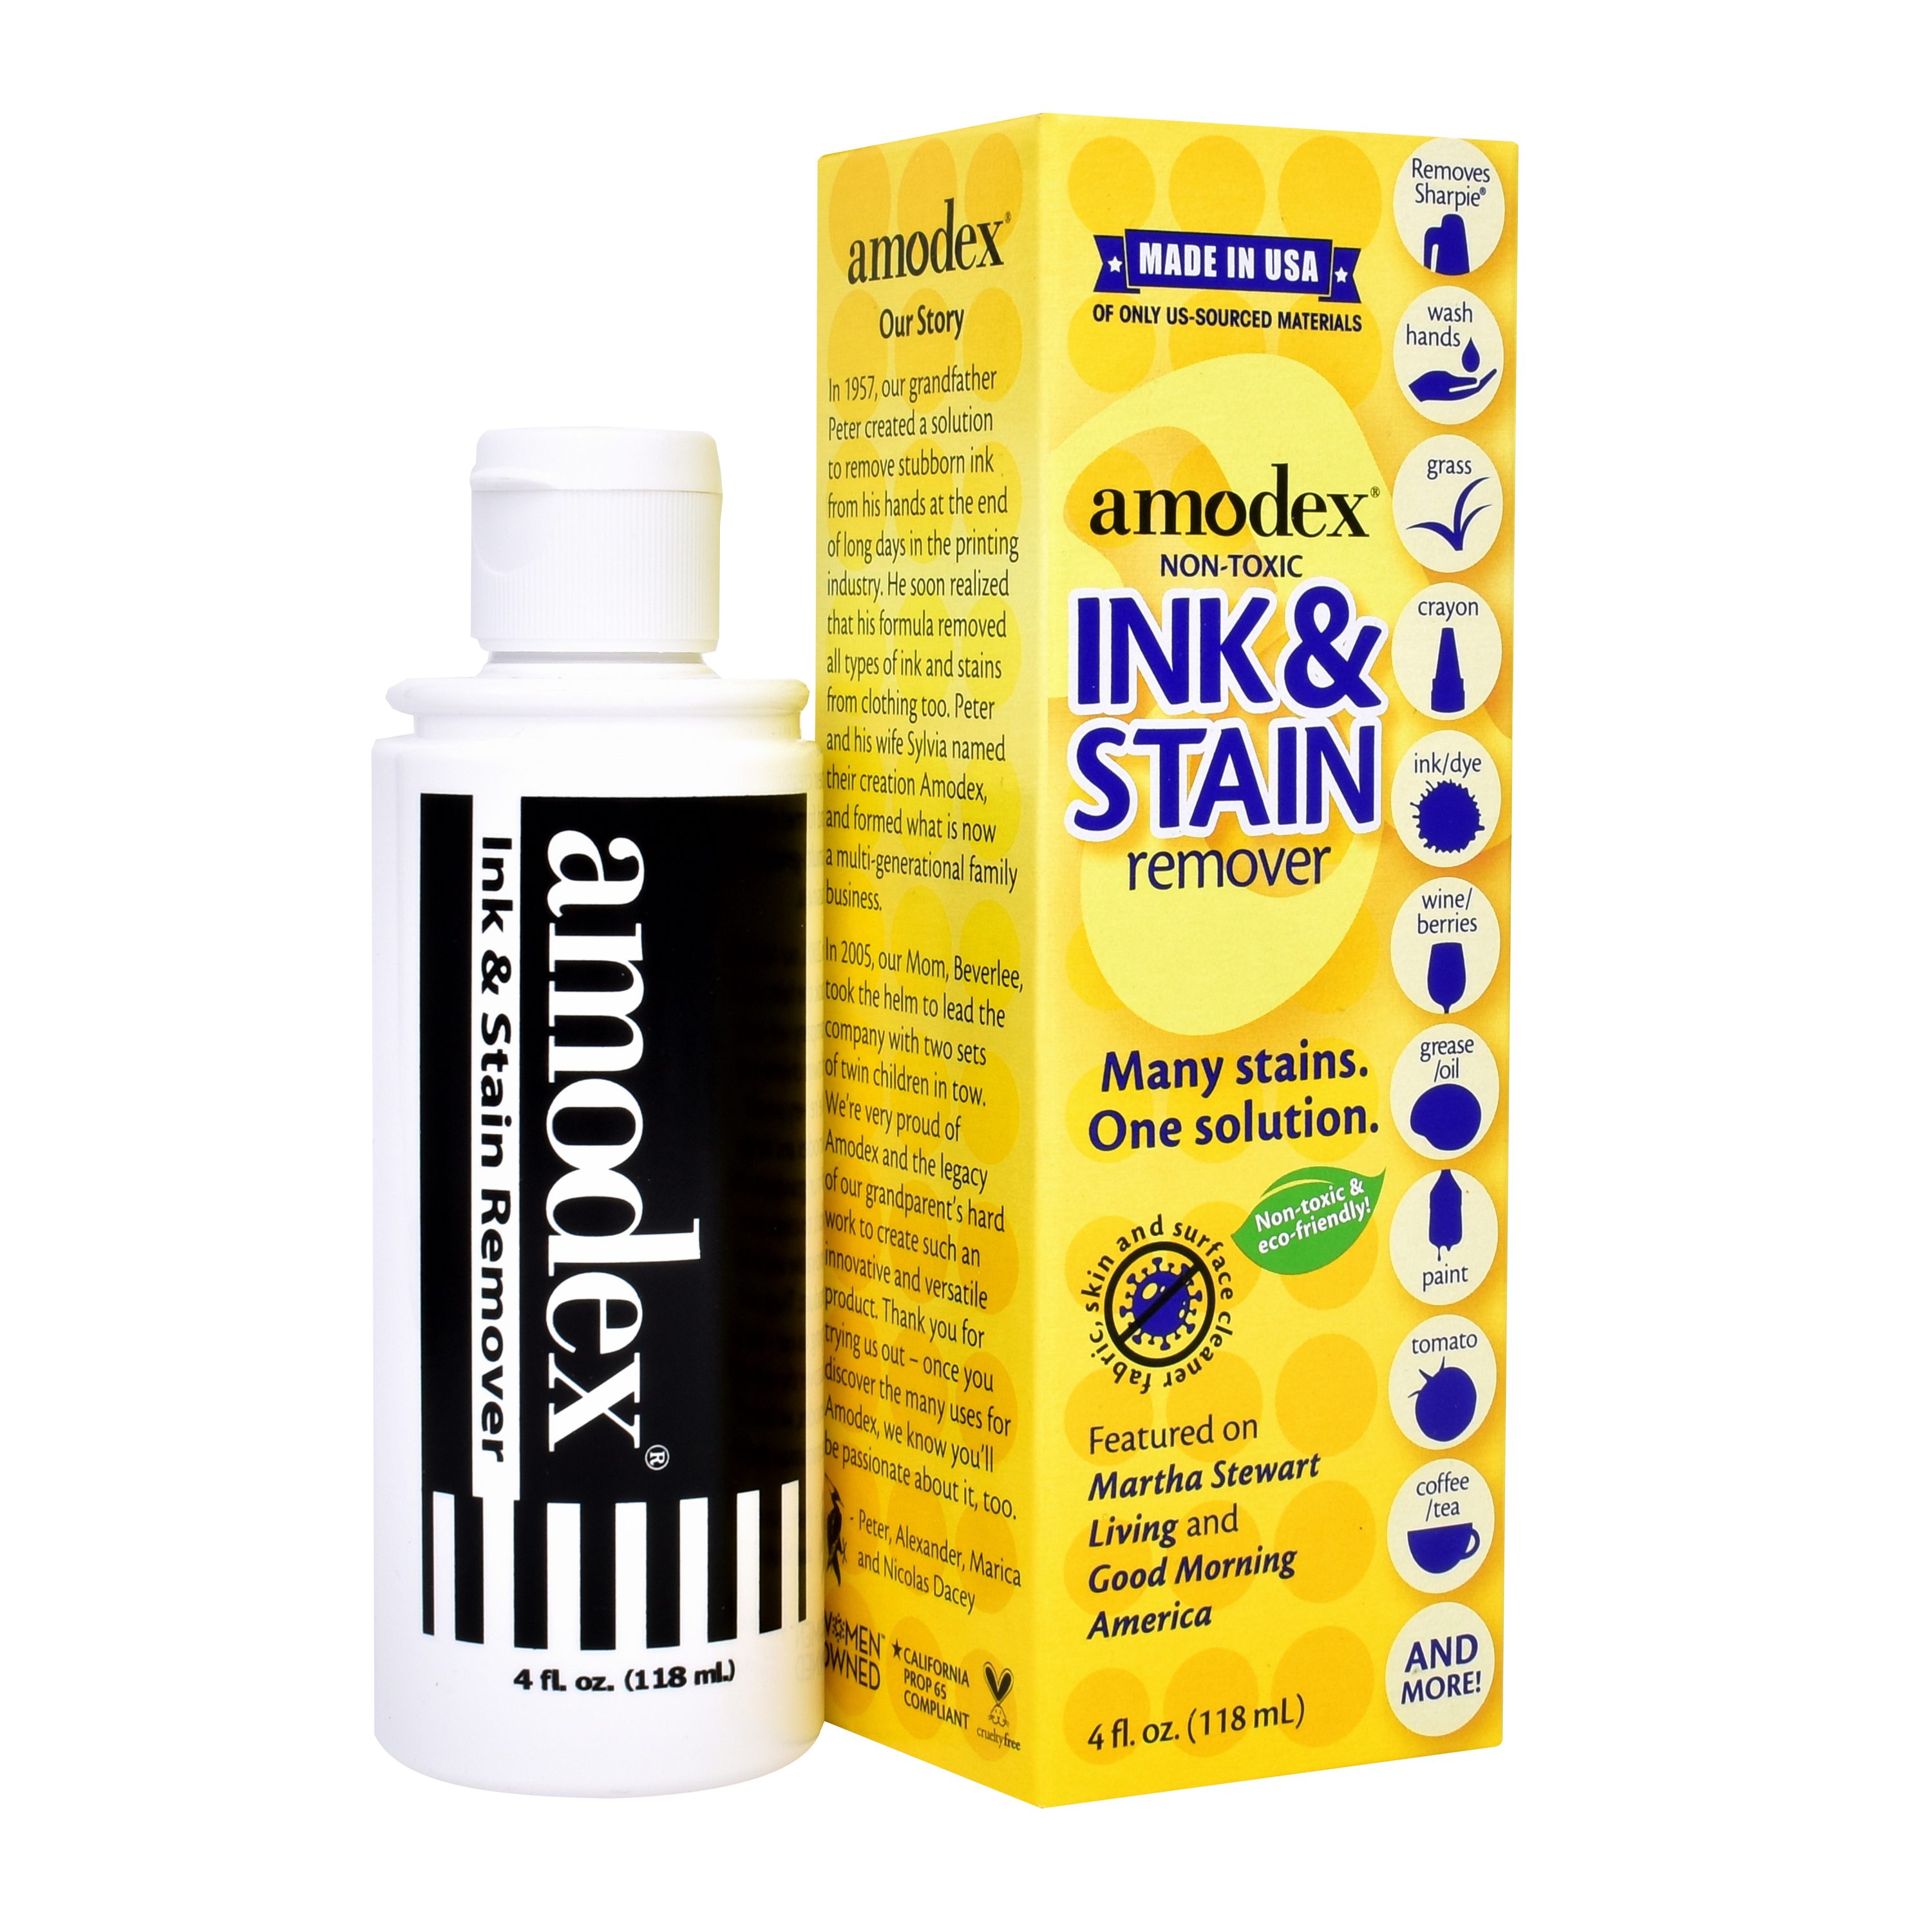 Amodex Top-Rated 4-Fl Oz Ink and Stain Remover, Safe for All Fabrics, Instant or Pre-Treat, Removes Sharpie, Food, Grease, Grass, and More